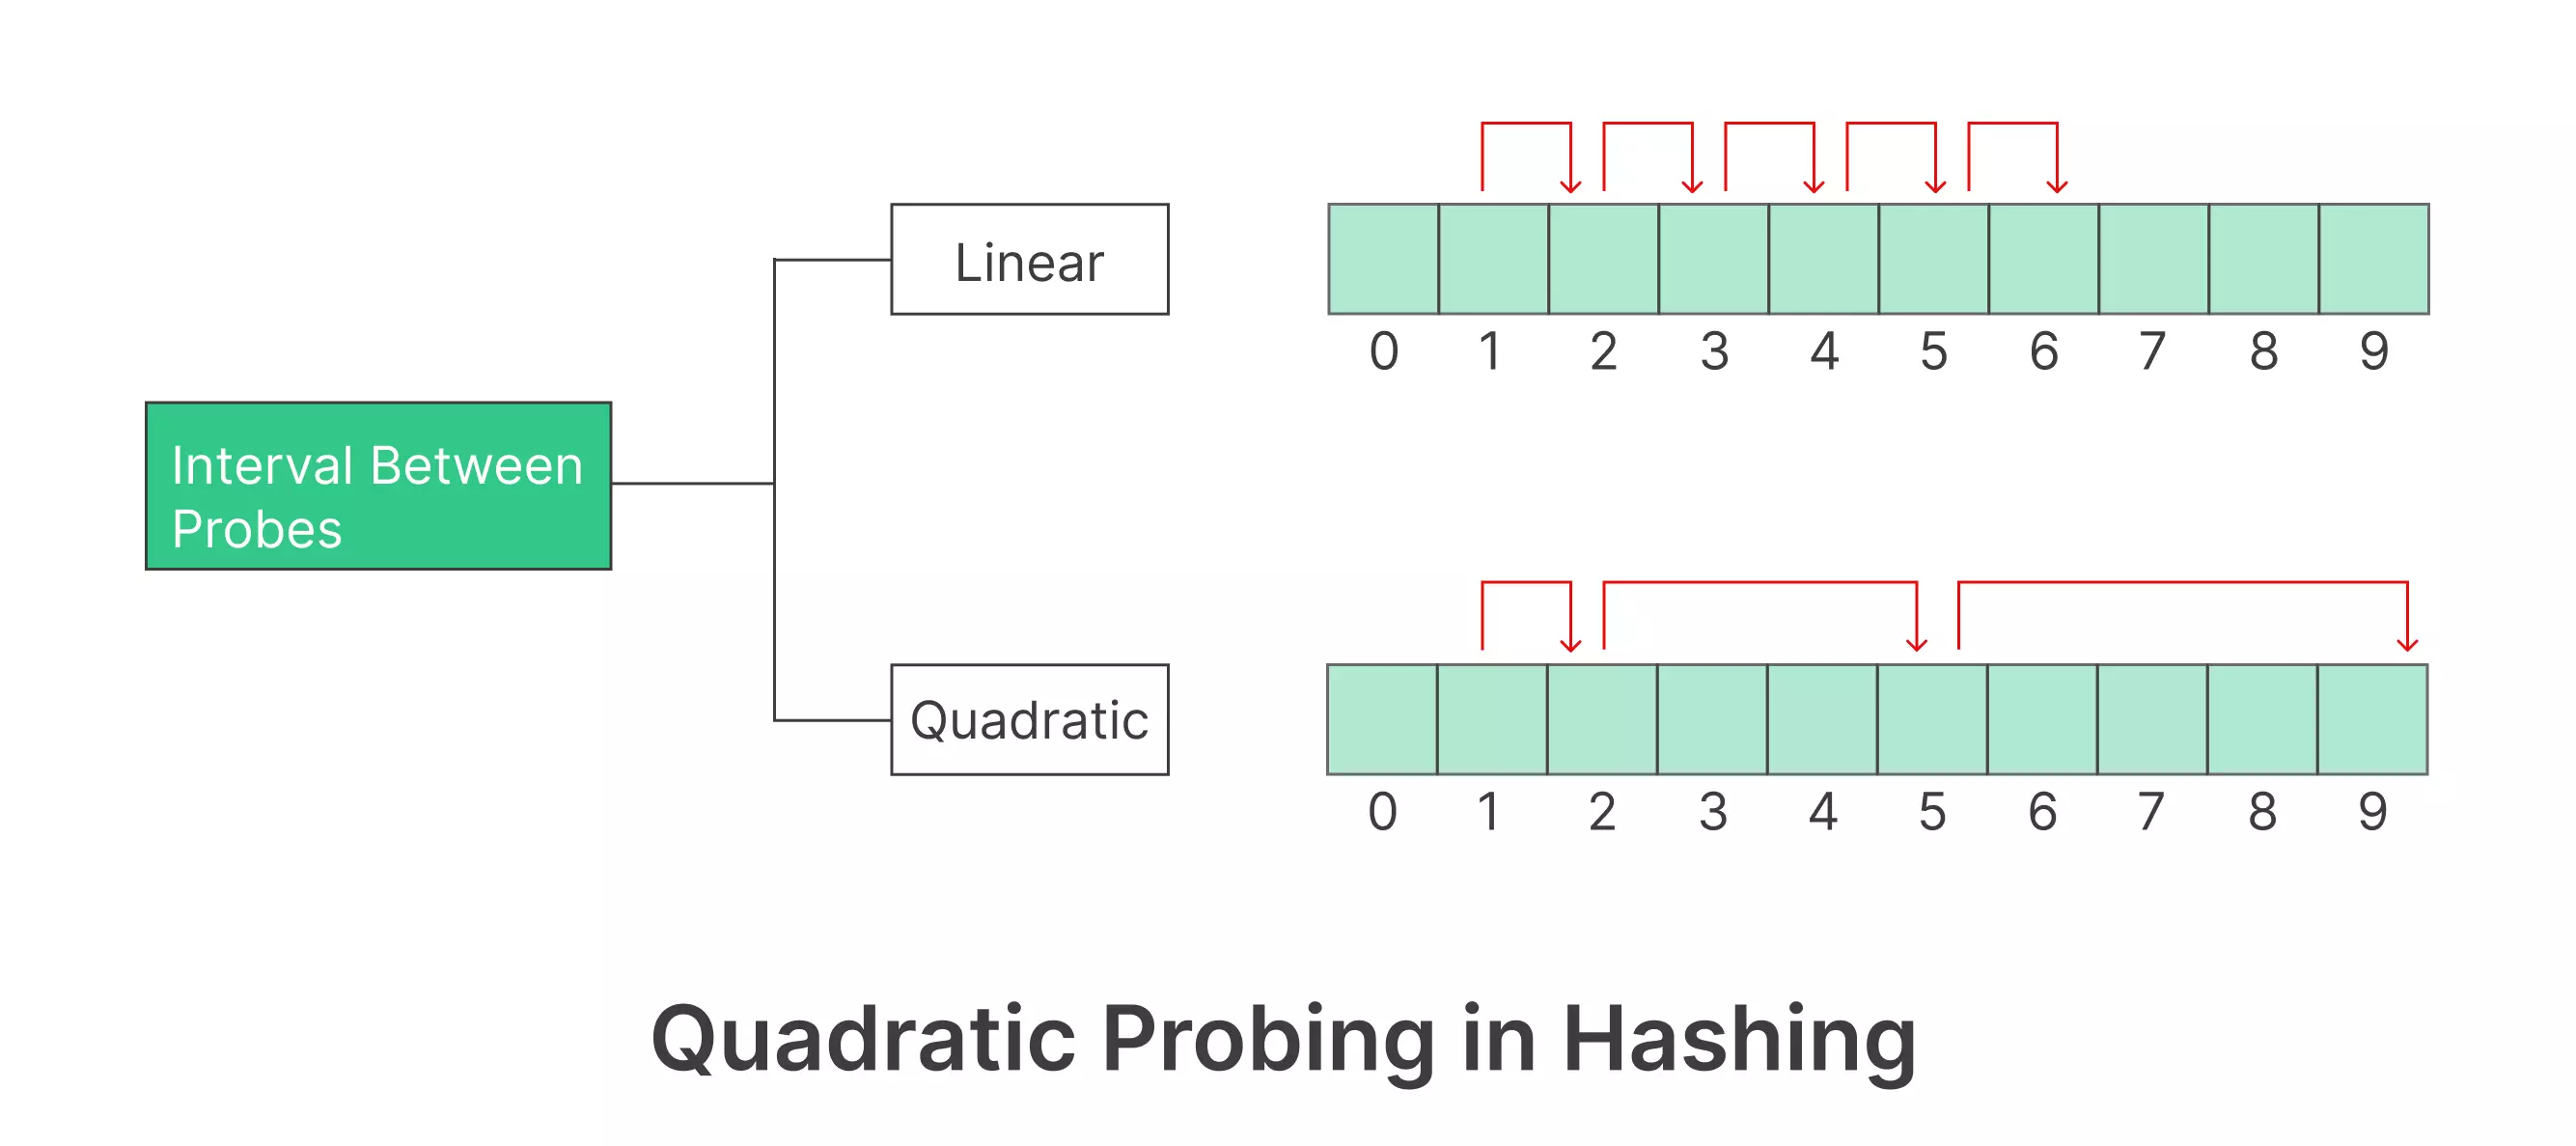 Linear and Quadratic probing in hashing